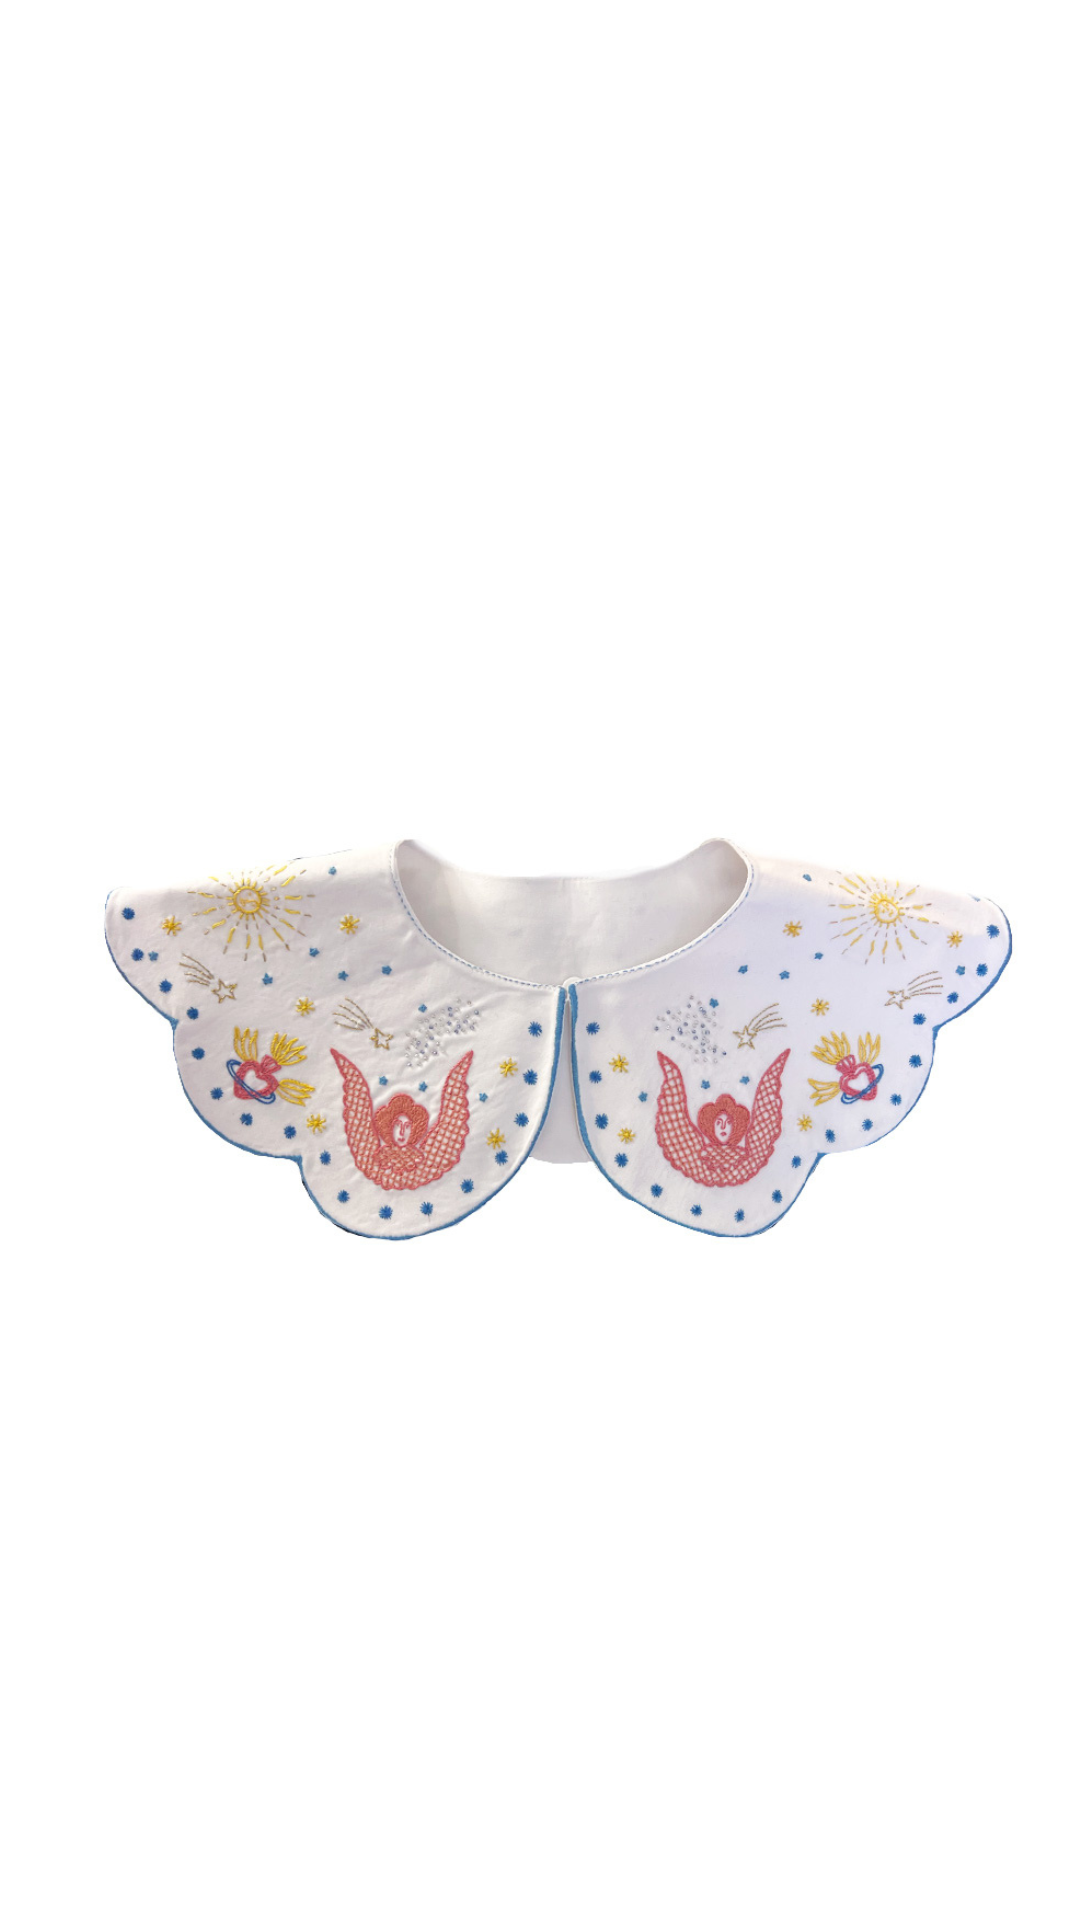 Collar with handmade embroidery "Angels"